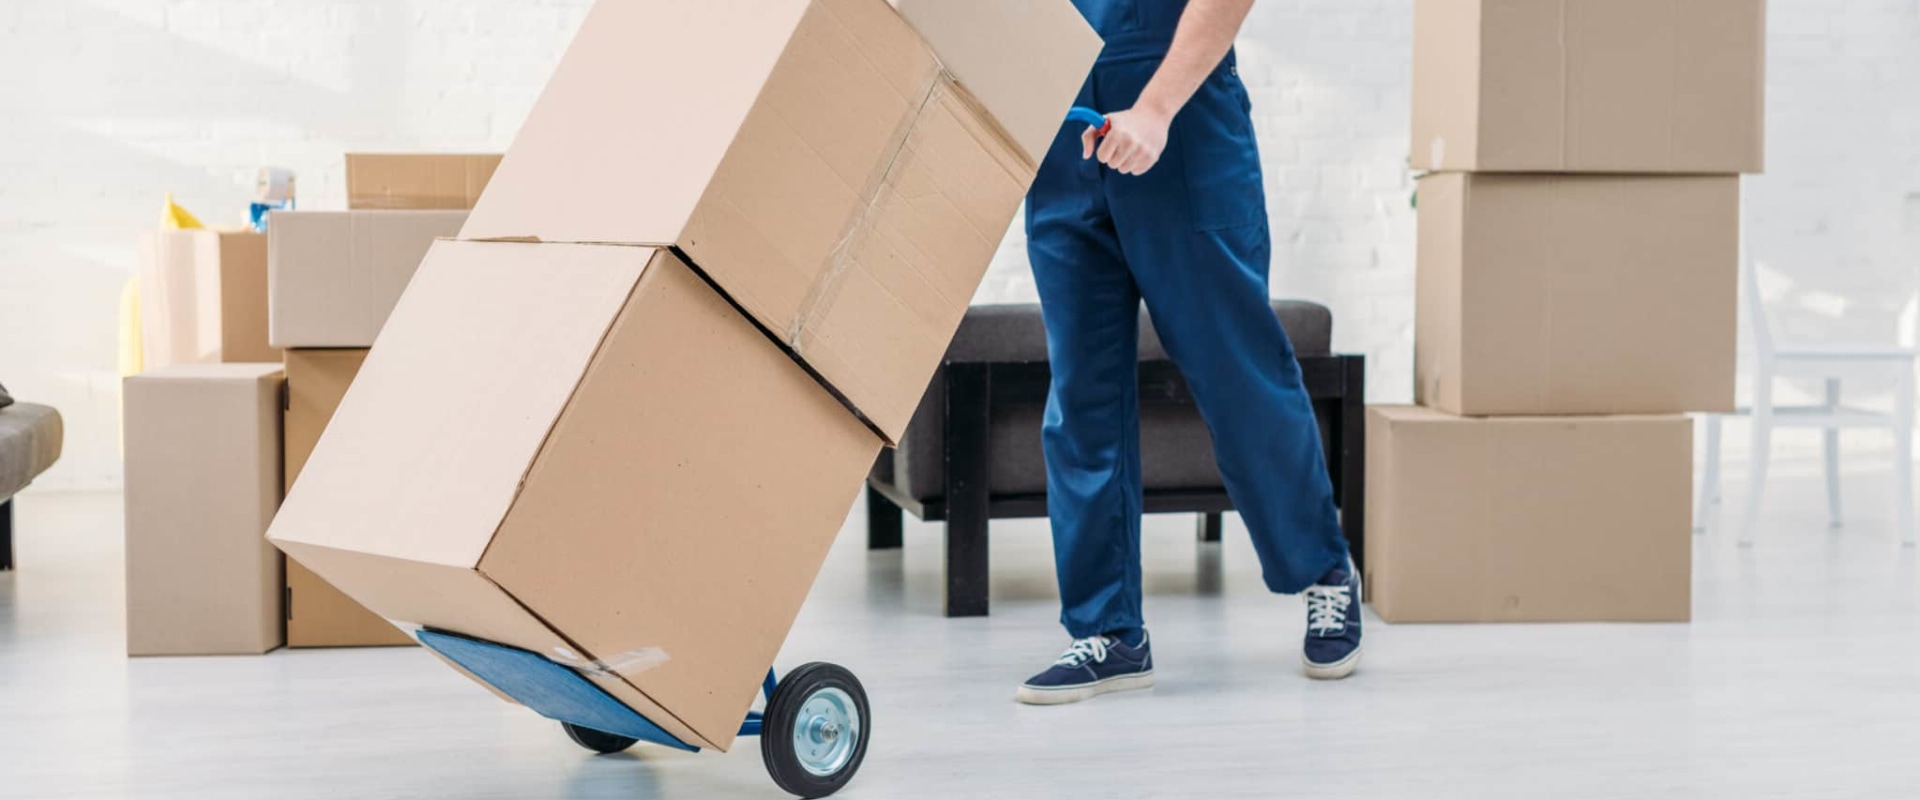 The Importance of Booking a Moving Company in Advance